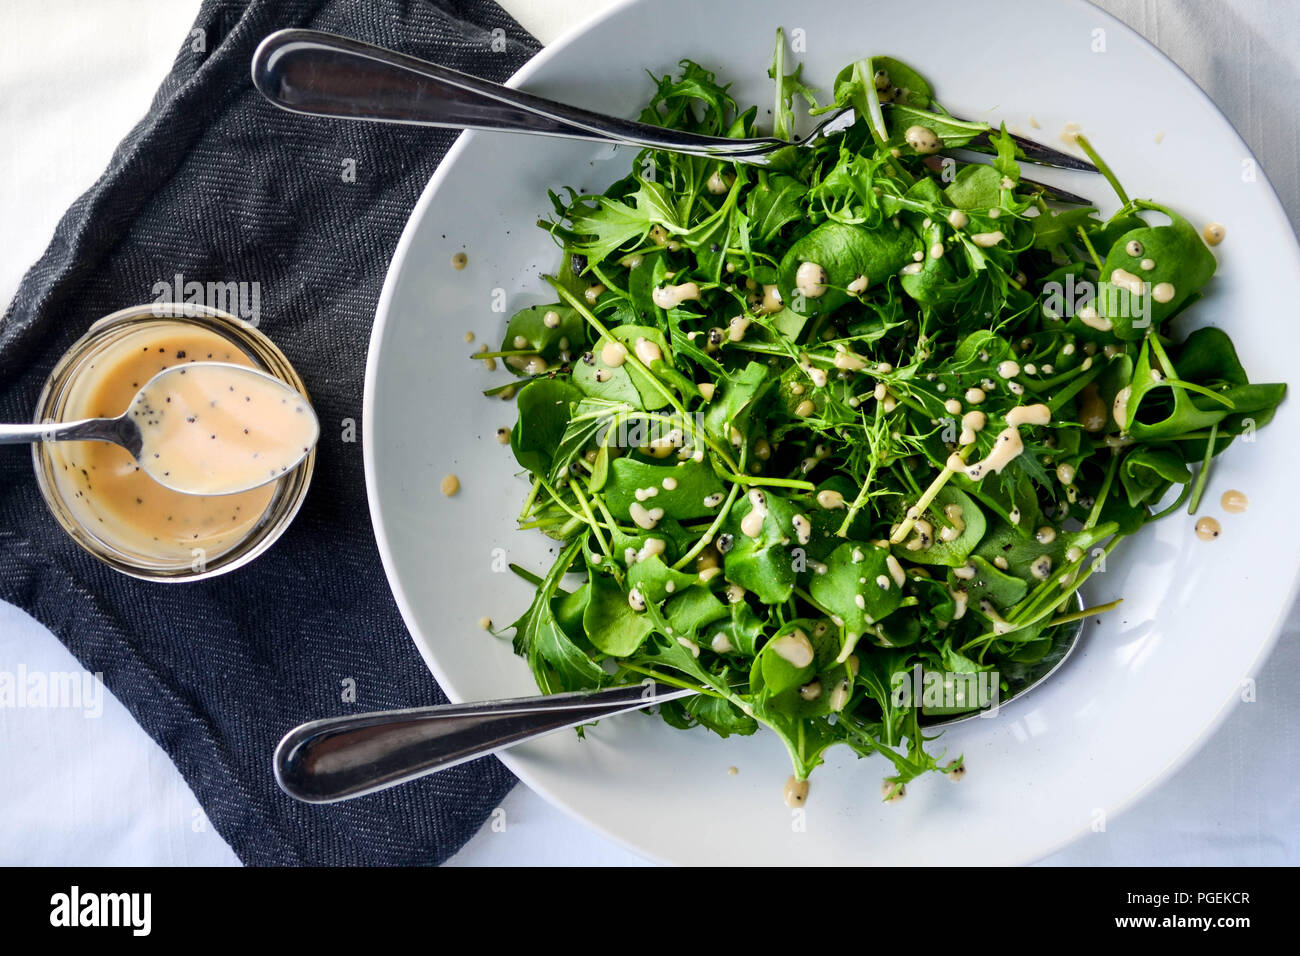 Flat-lay green salad of mizuna and miner's lettuce served with a rhubarb and poppy seed vinaigrette, served in a white bowl with two serving spoons. Stock Photo